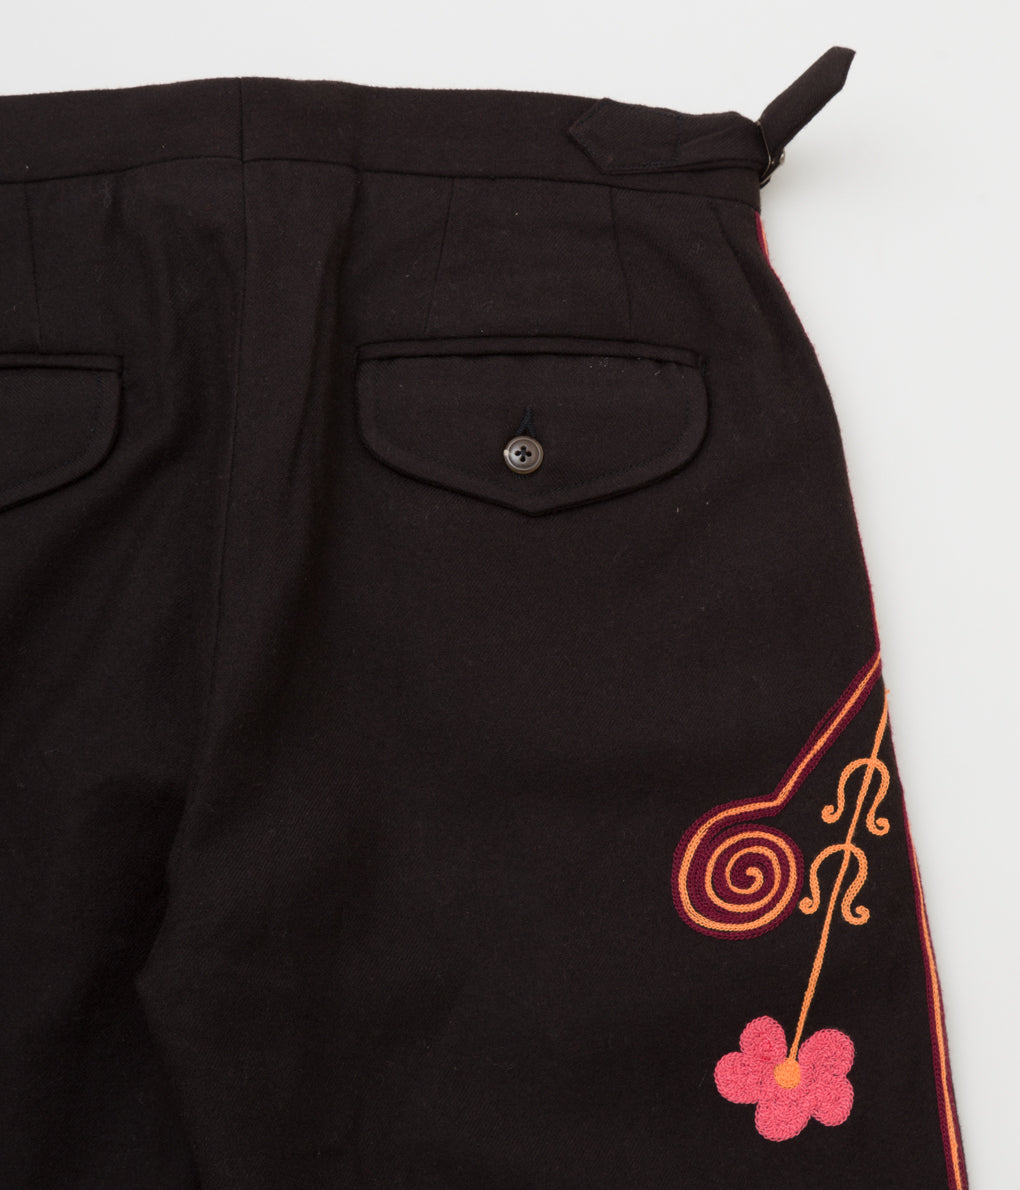 BODE "RANCHER EMBROIDERED TROUSERS" (BROWN MULTI)